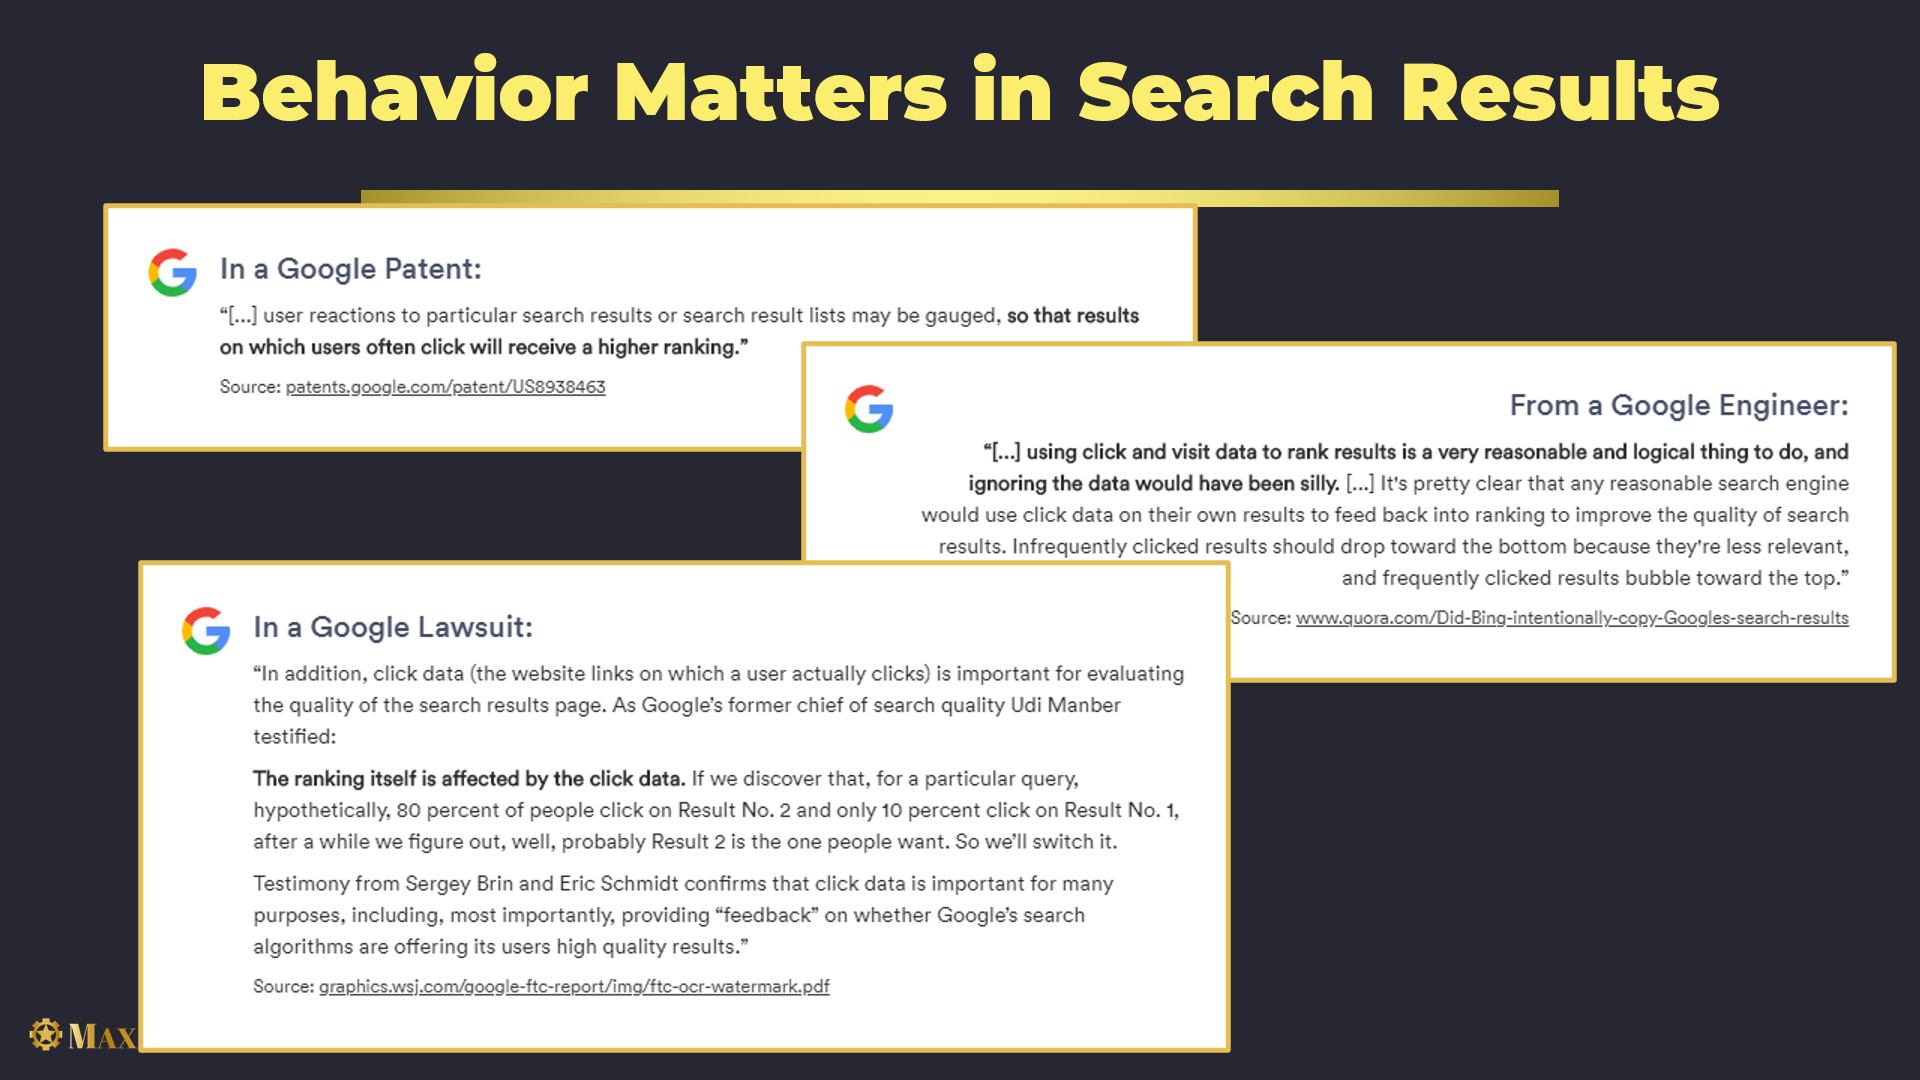 Behavior matters in search results